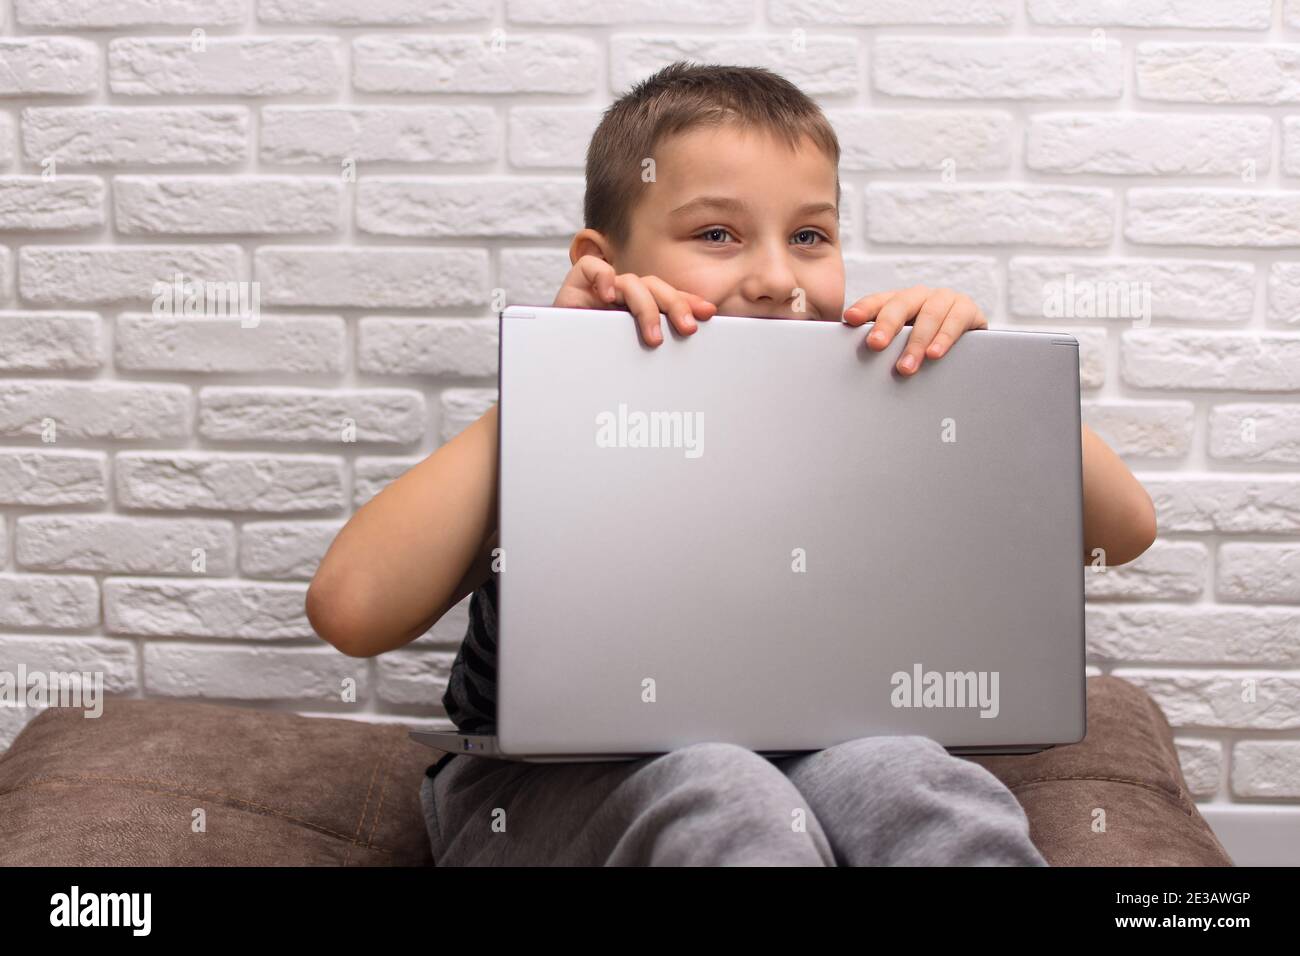 A 6-7-year-old boy is sitting on the floor with a laptop. Against a brick wall. The child looks out from behind the laptop. Stock Photo